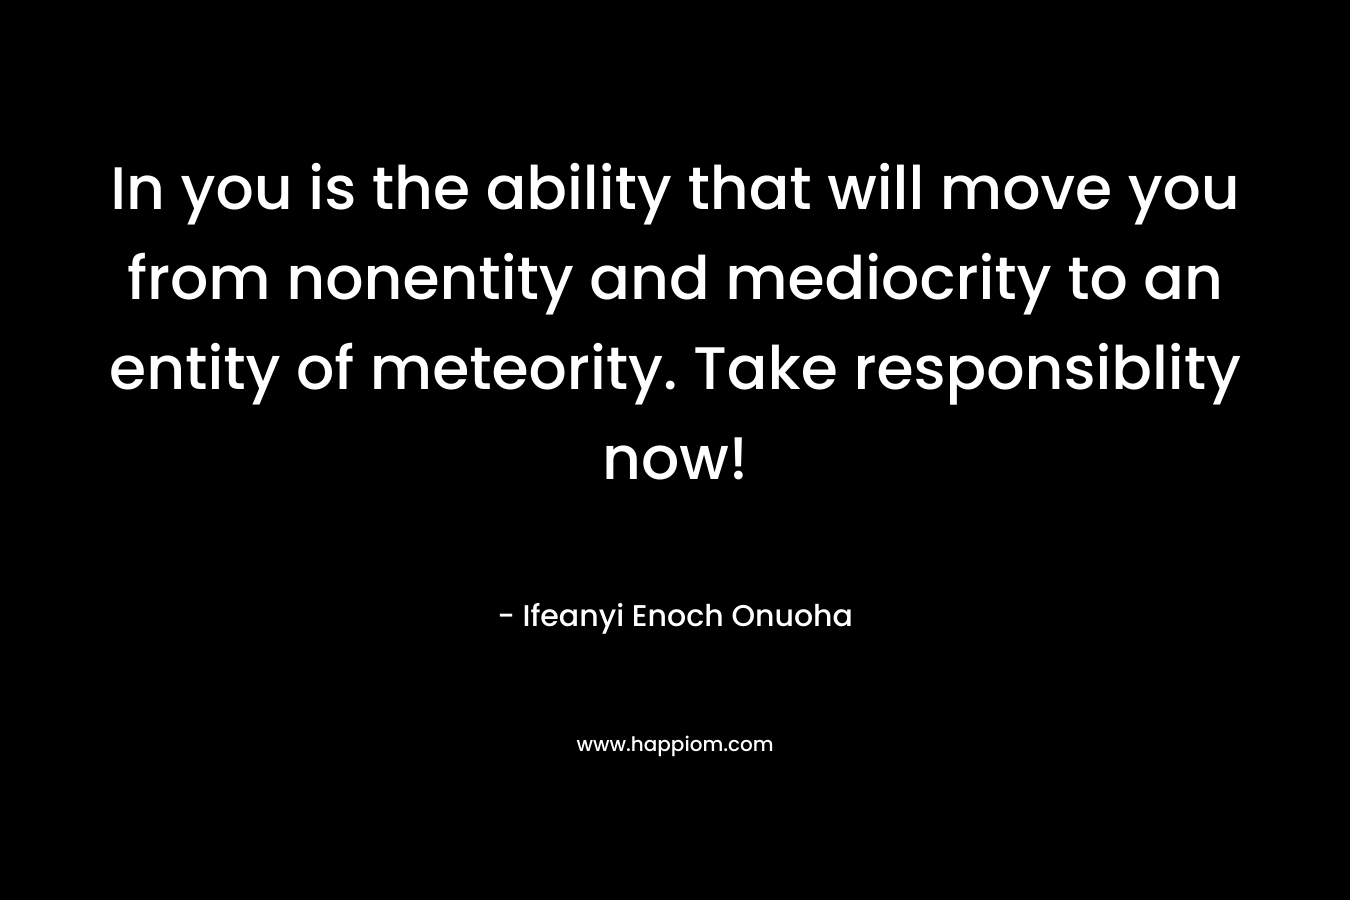 In you is the ability that will move you from nonentity and mediocrity to an entity of meteority. Take responsiblity now! – Ifeanyi Enoch Onuoha